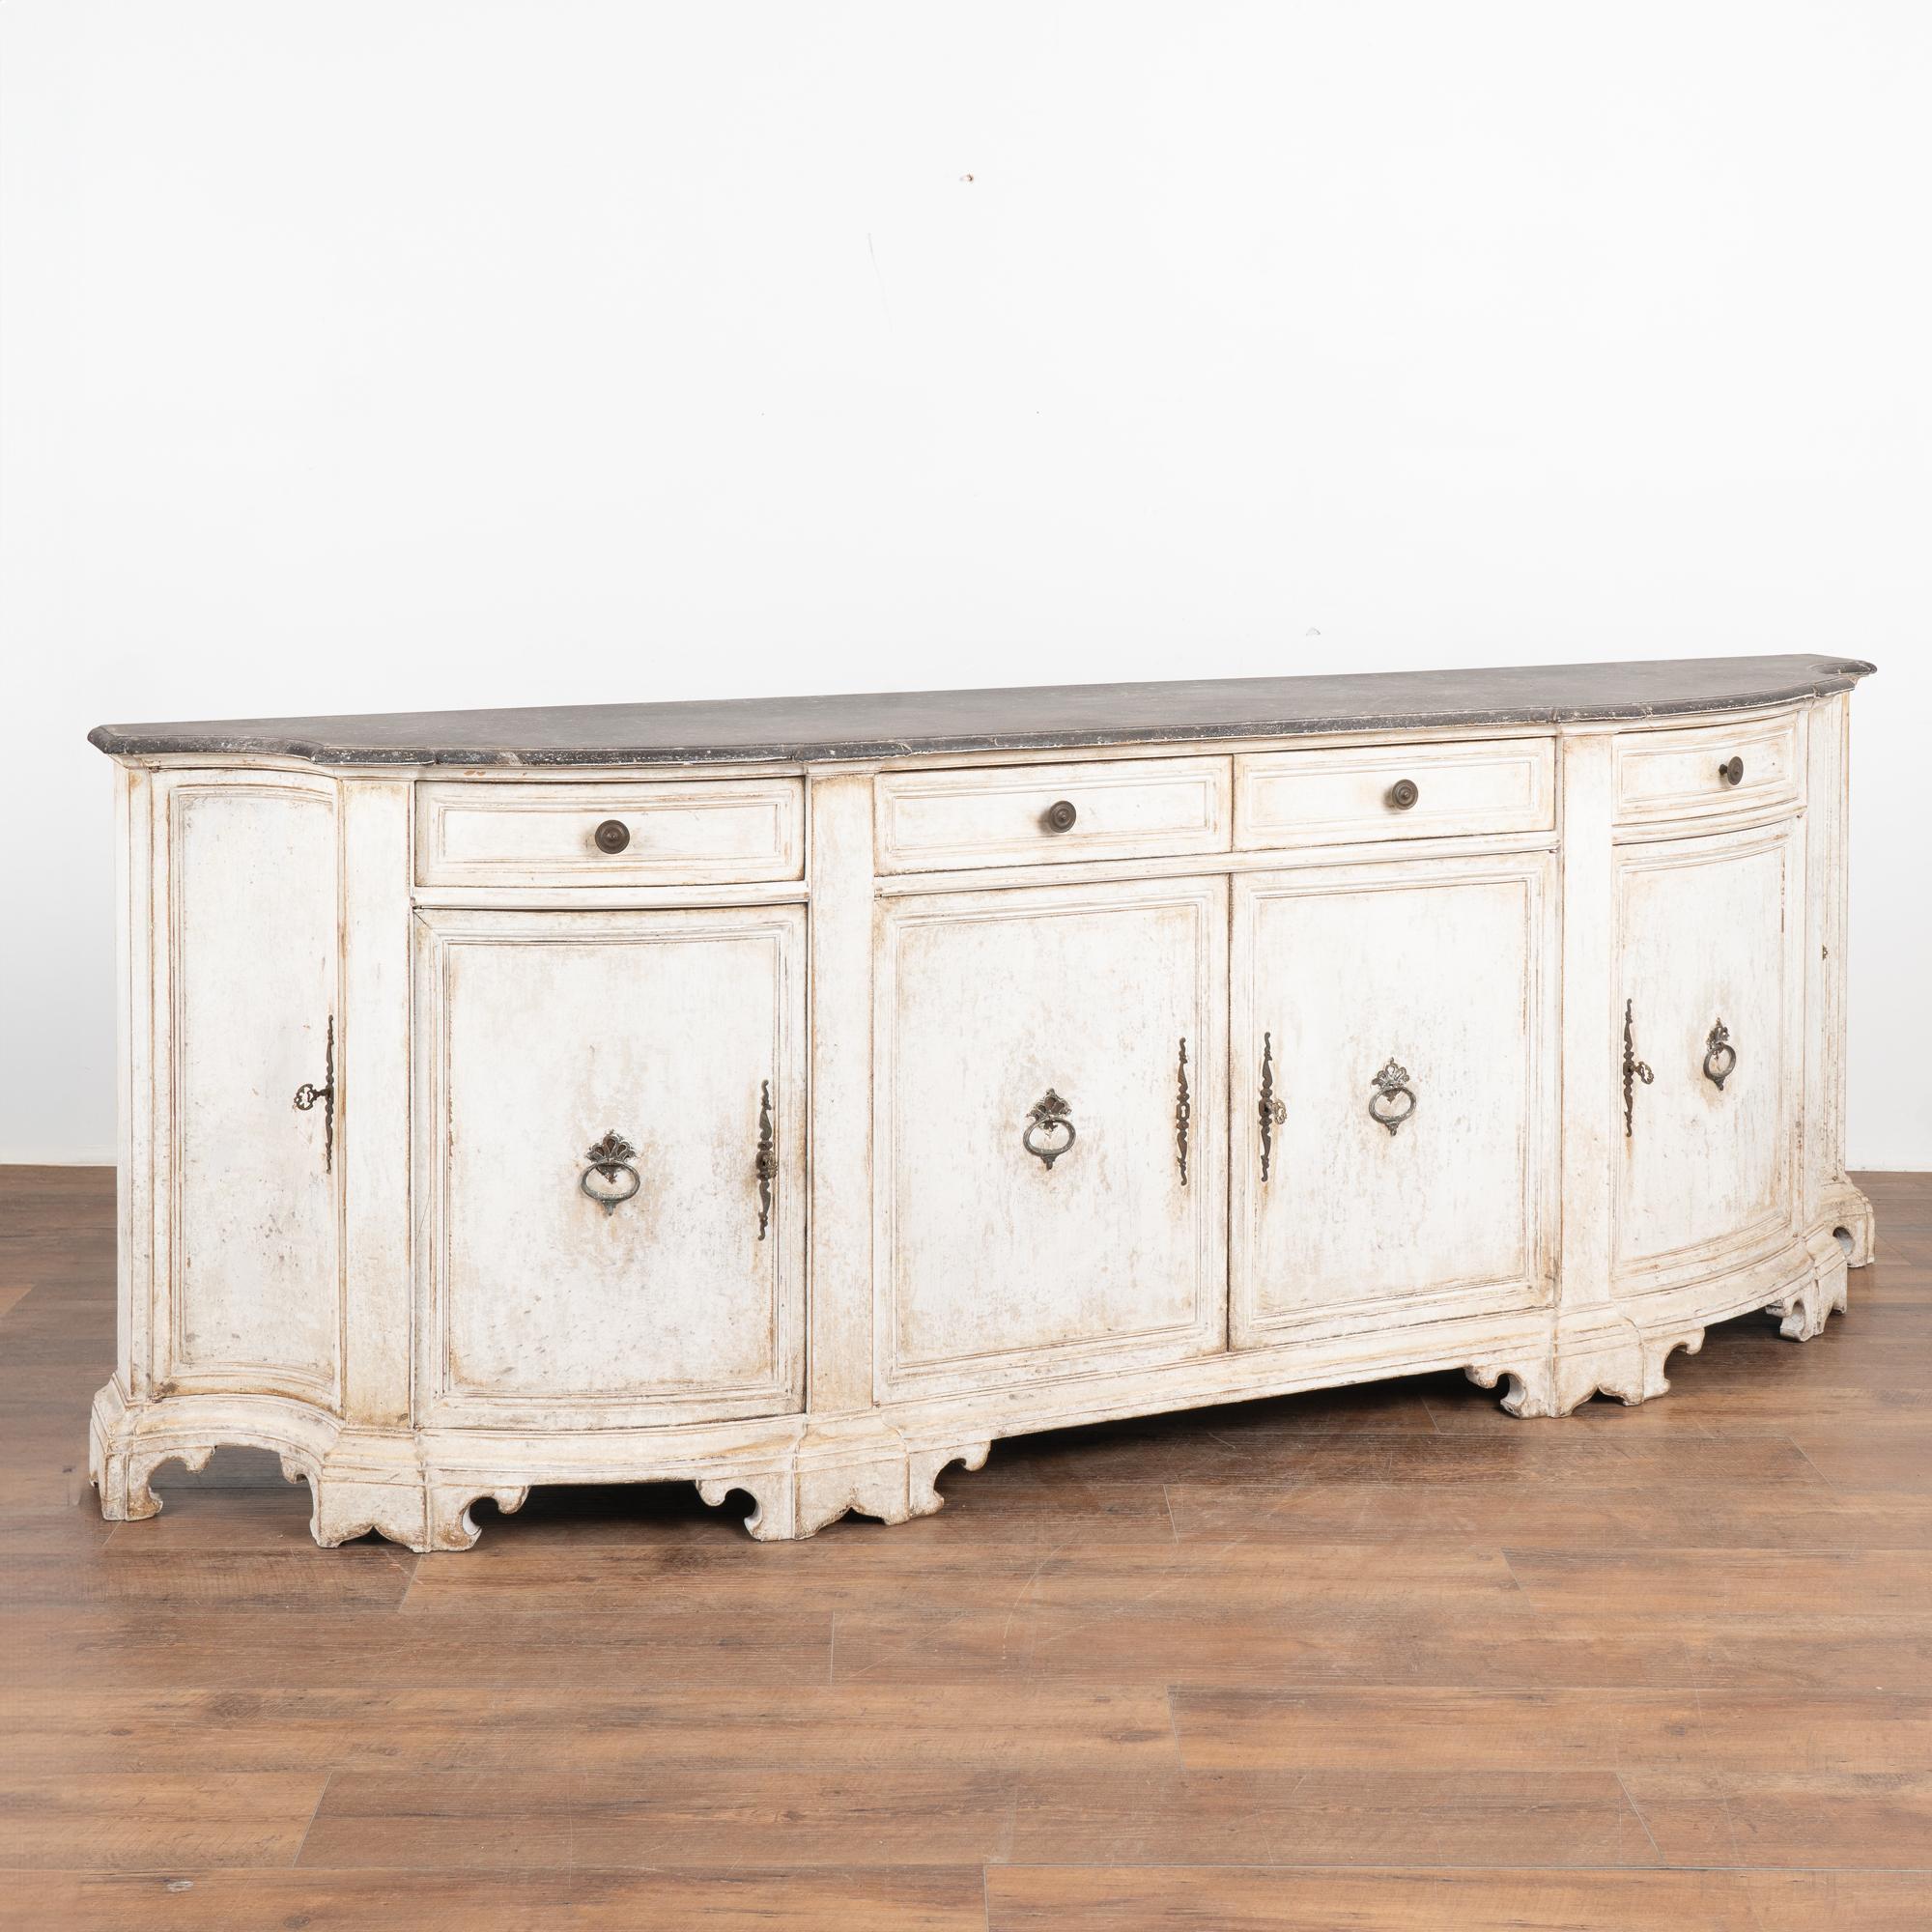 Impressive Italian painted oak sideboard with attractive concave curved end doors and decorative carved feet.
The newer professionally applied marbled and muted antique white painted finish beautifully compliments the age and grace of this beautiful